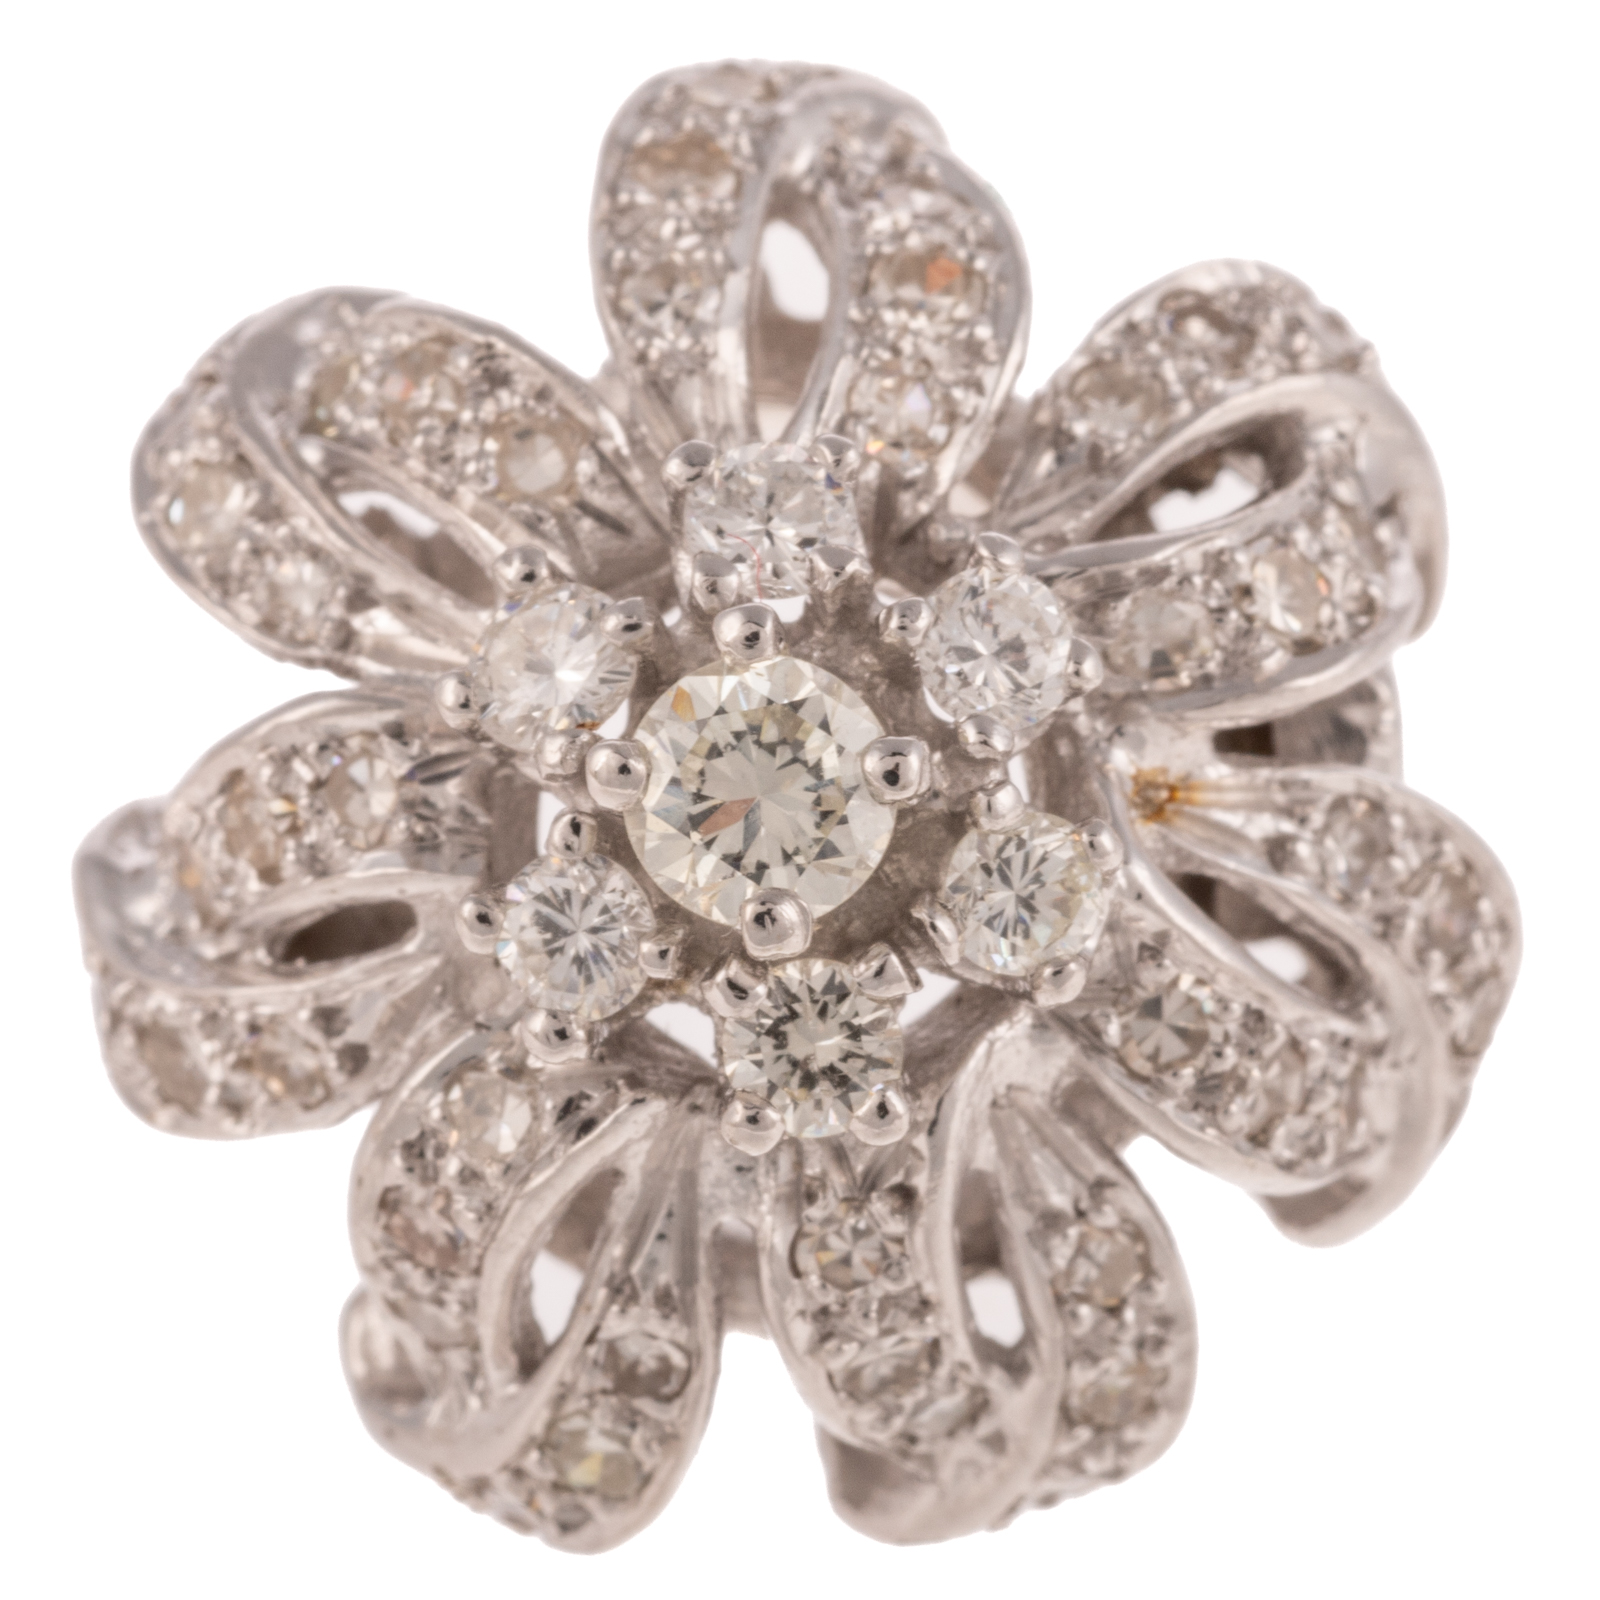 A DIAMOND FLOWER COCKTAIL RING